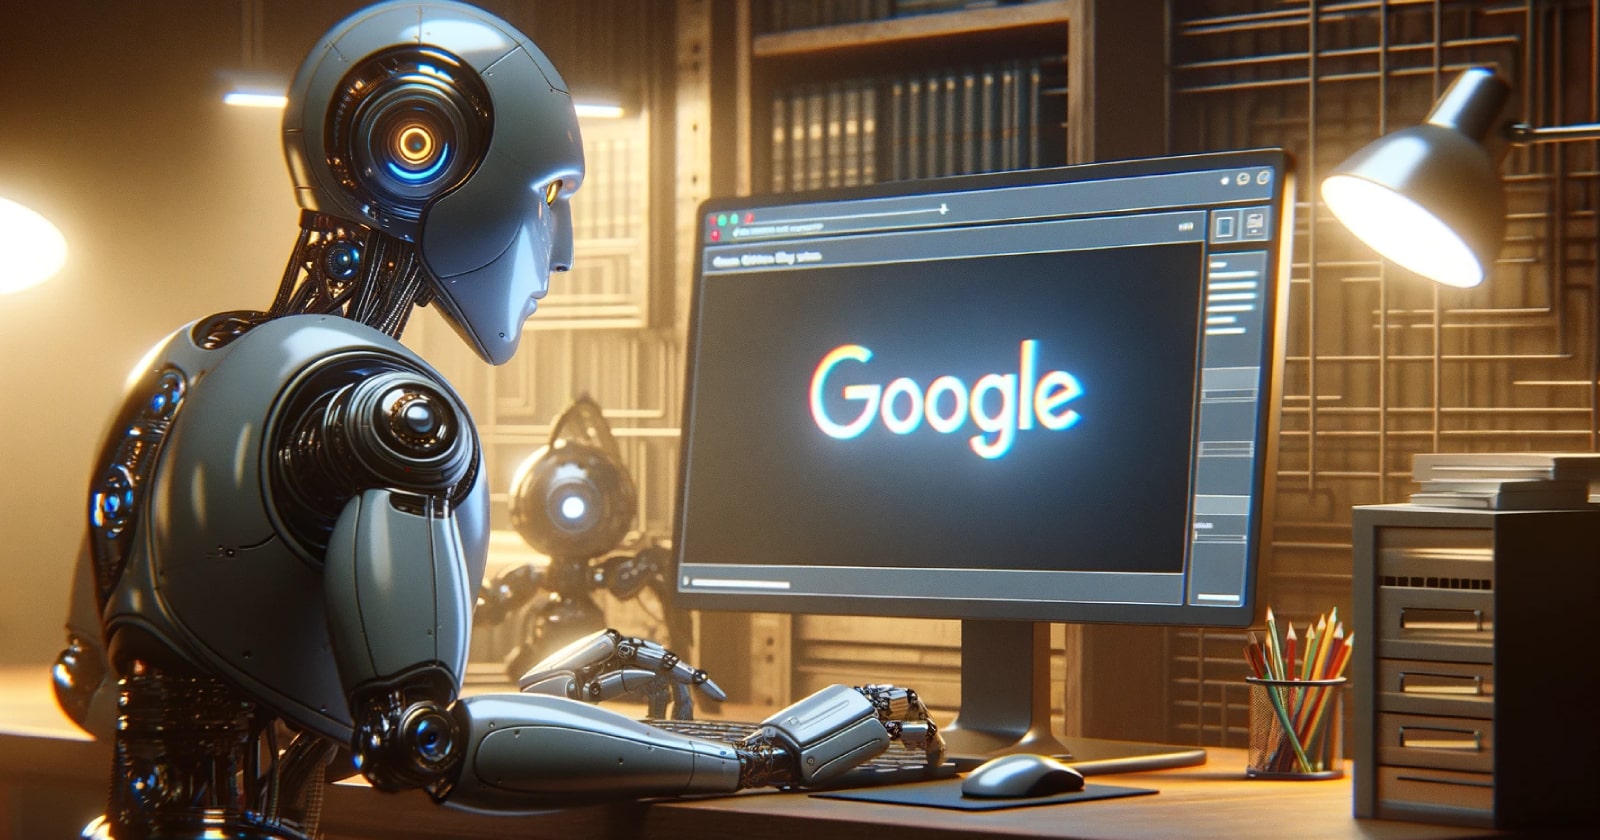 Google Introduces AI Model for Game Development!